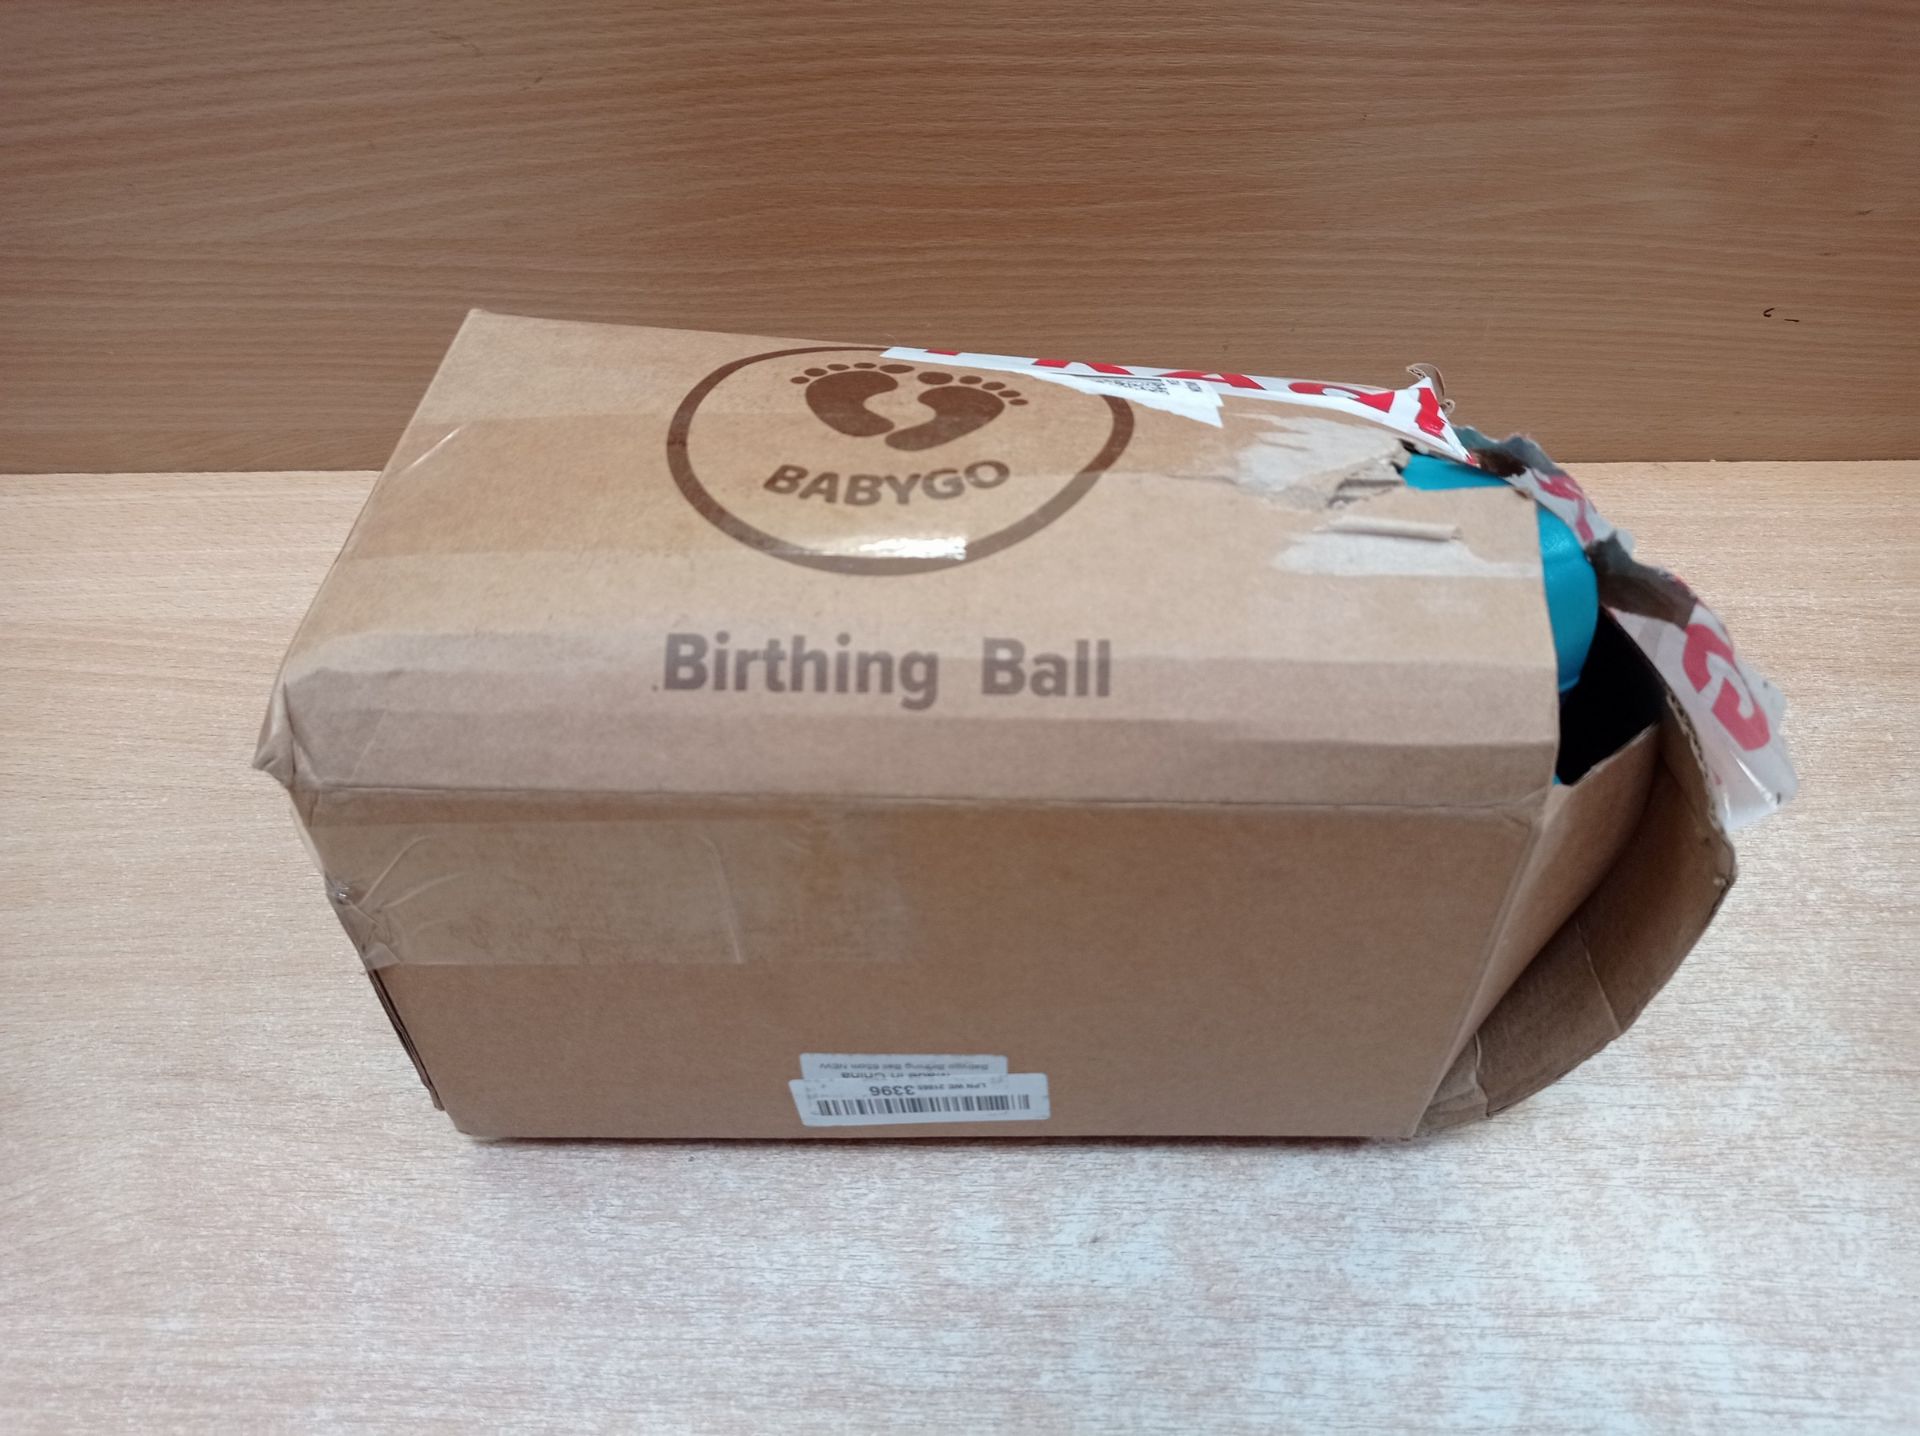 RRP £28.48 BABYGO Birthing Ball For Pregnancy Maternity Labour - Image 2 of 2